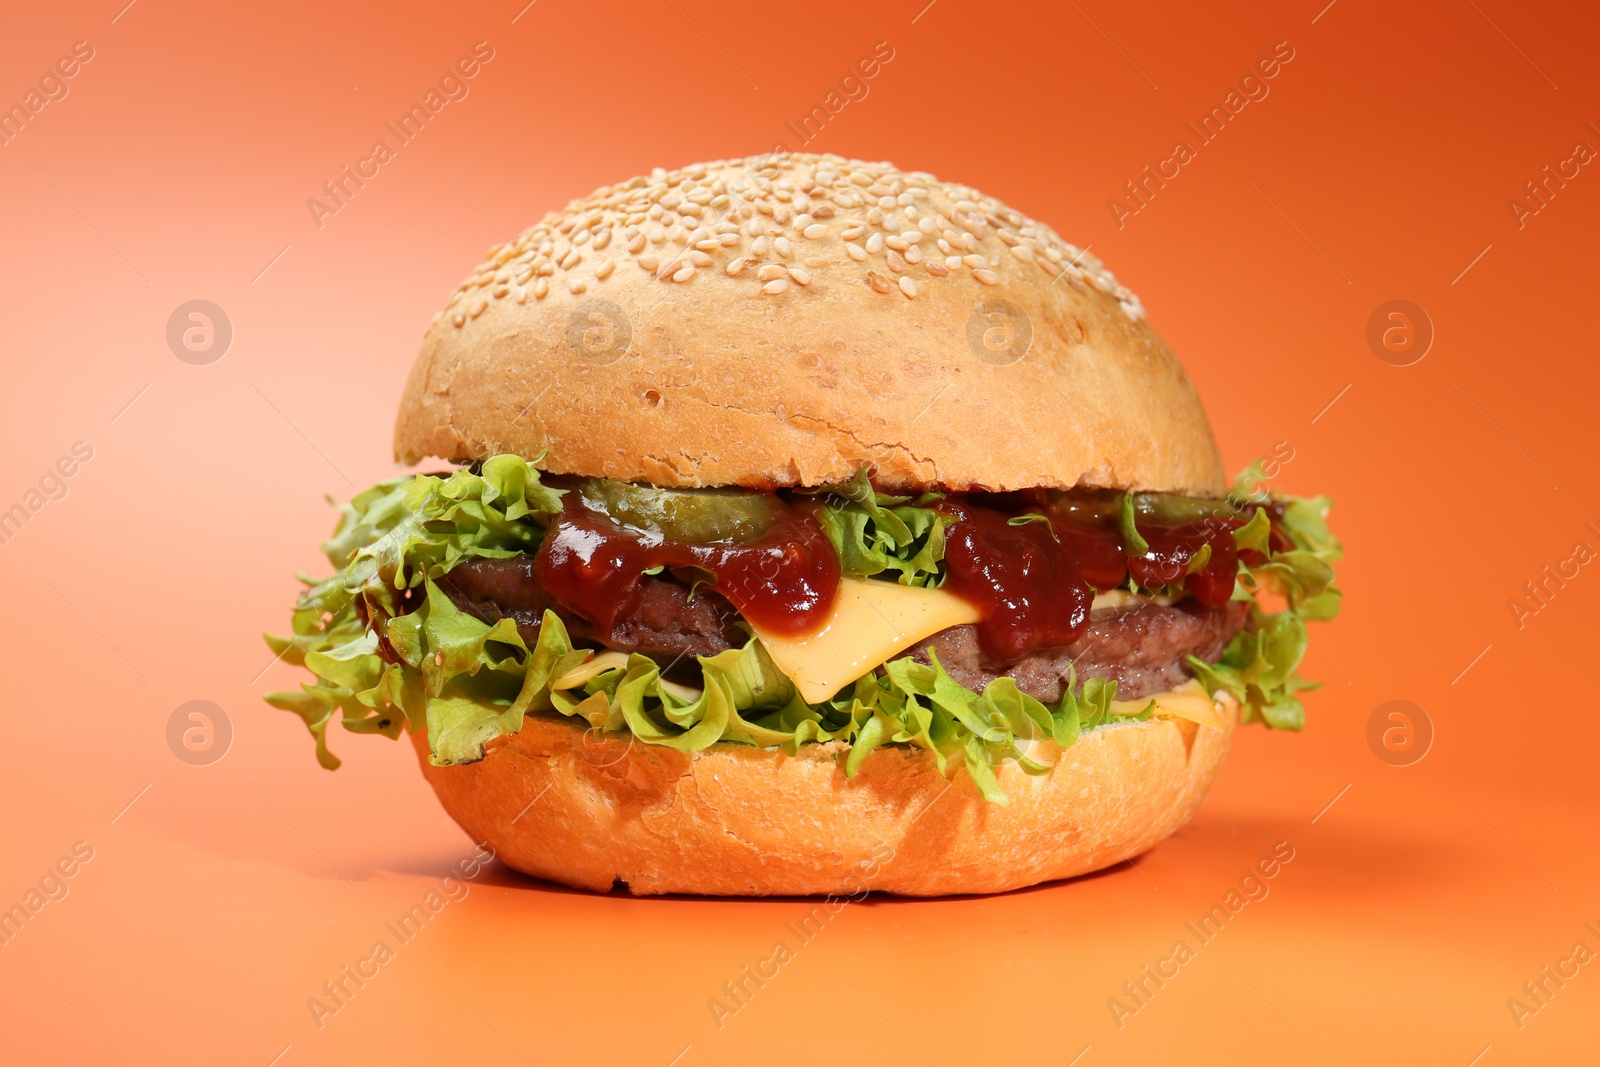 Photo of Delicious cheeseburger with lettuce, pickle, ketchup and patty on coral background, closeup